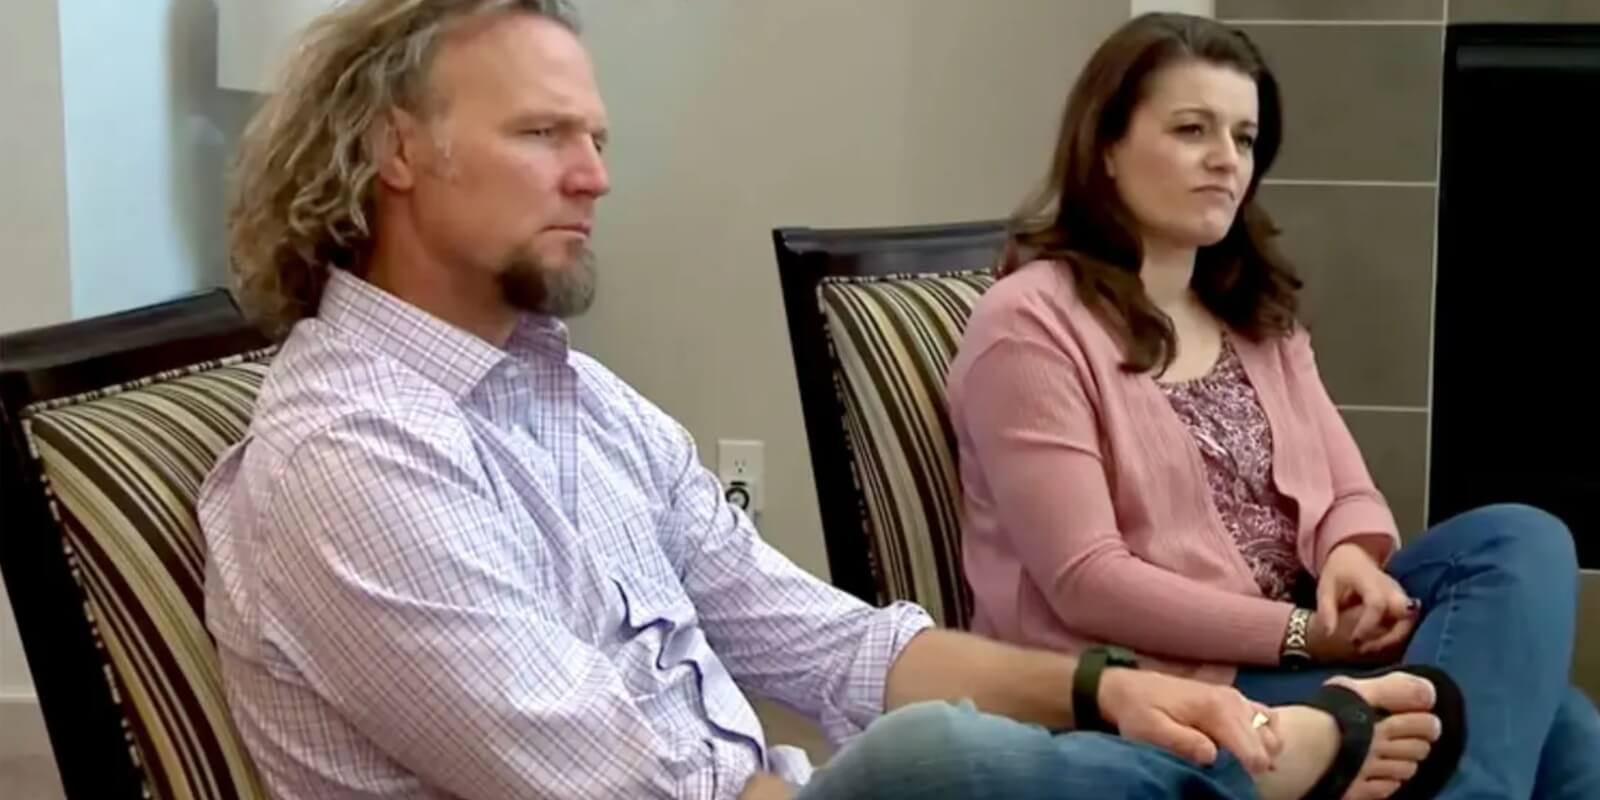 Kody Brown and Robyn Brown in an episode shot at home for TLC's 'Sister Wives.'